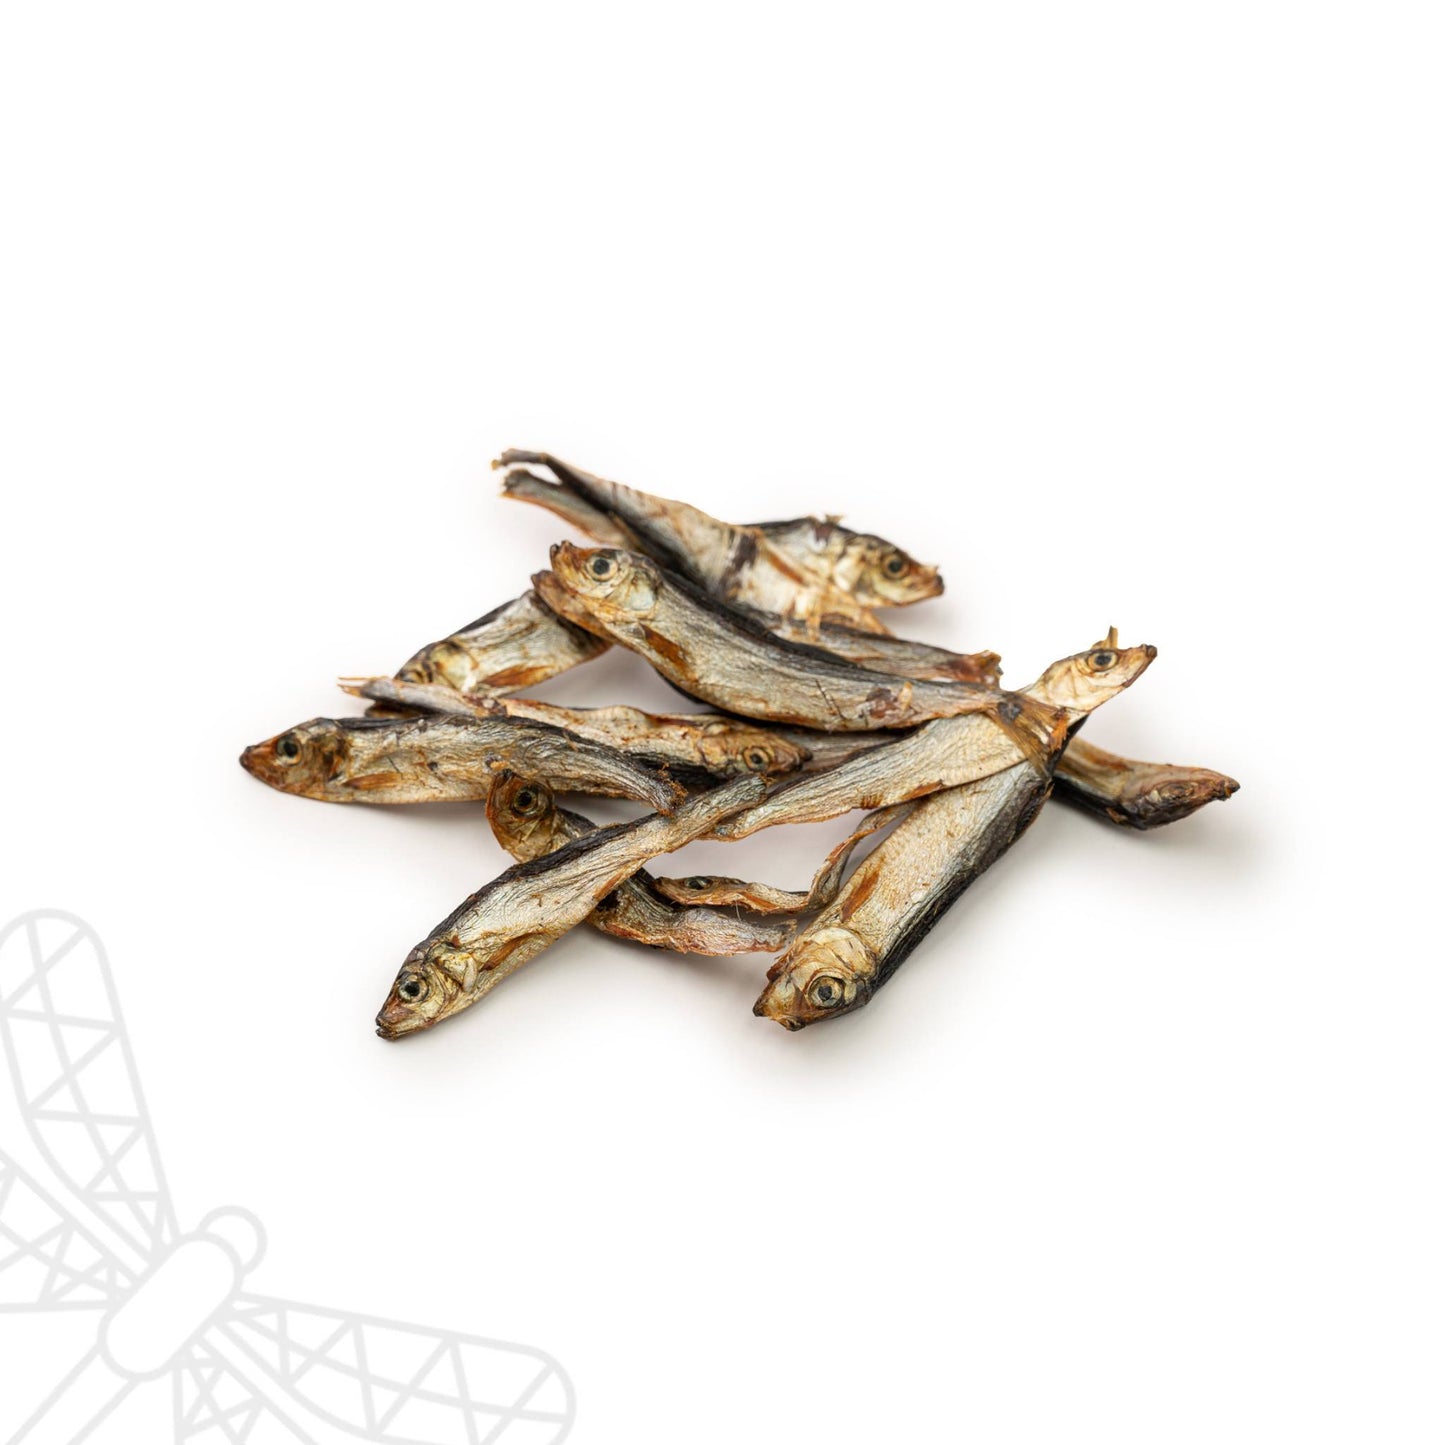 Sprats for dogs dried fish